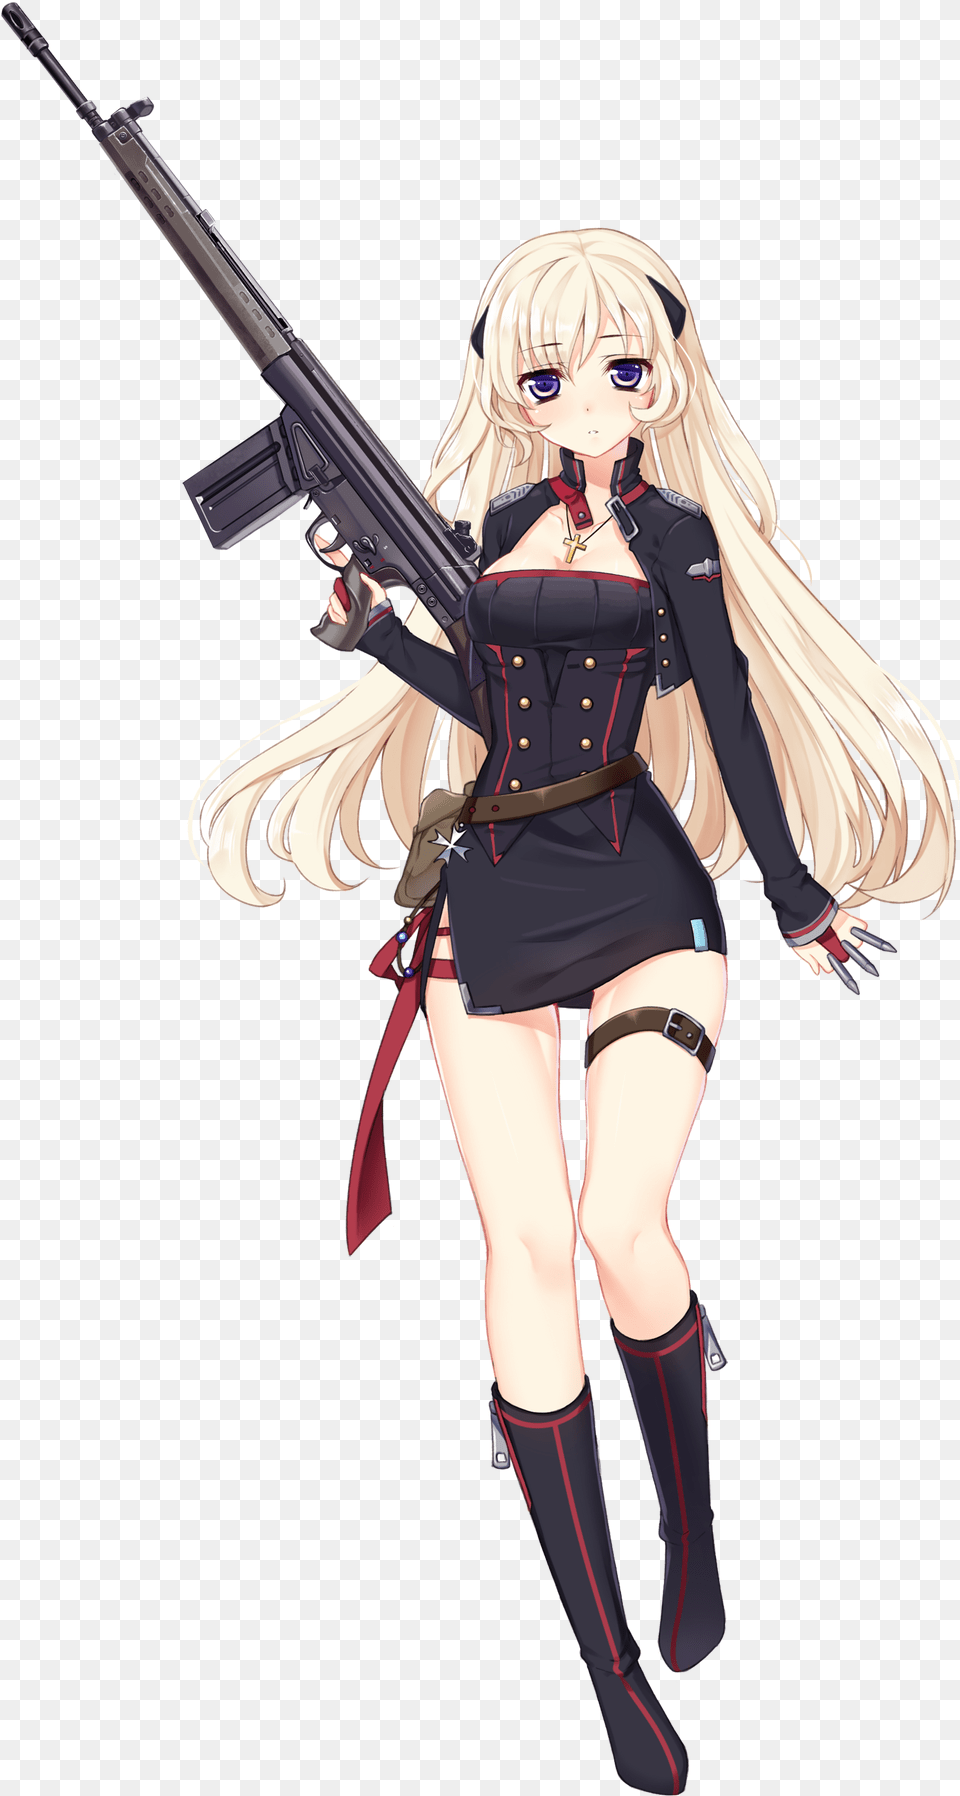 Transparent Anime Girl With Gun Cosplay Costume For Girls, Book, Weapon, Comics, Rifle Free Png